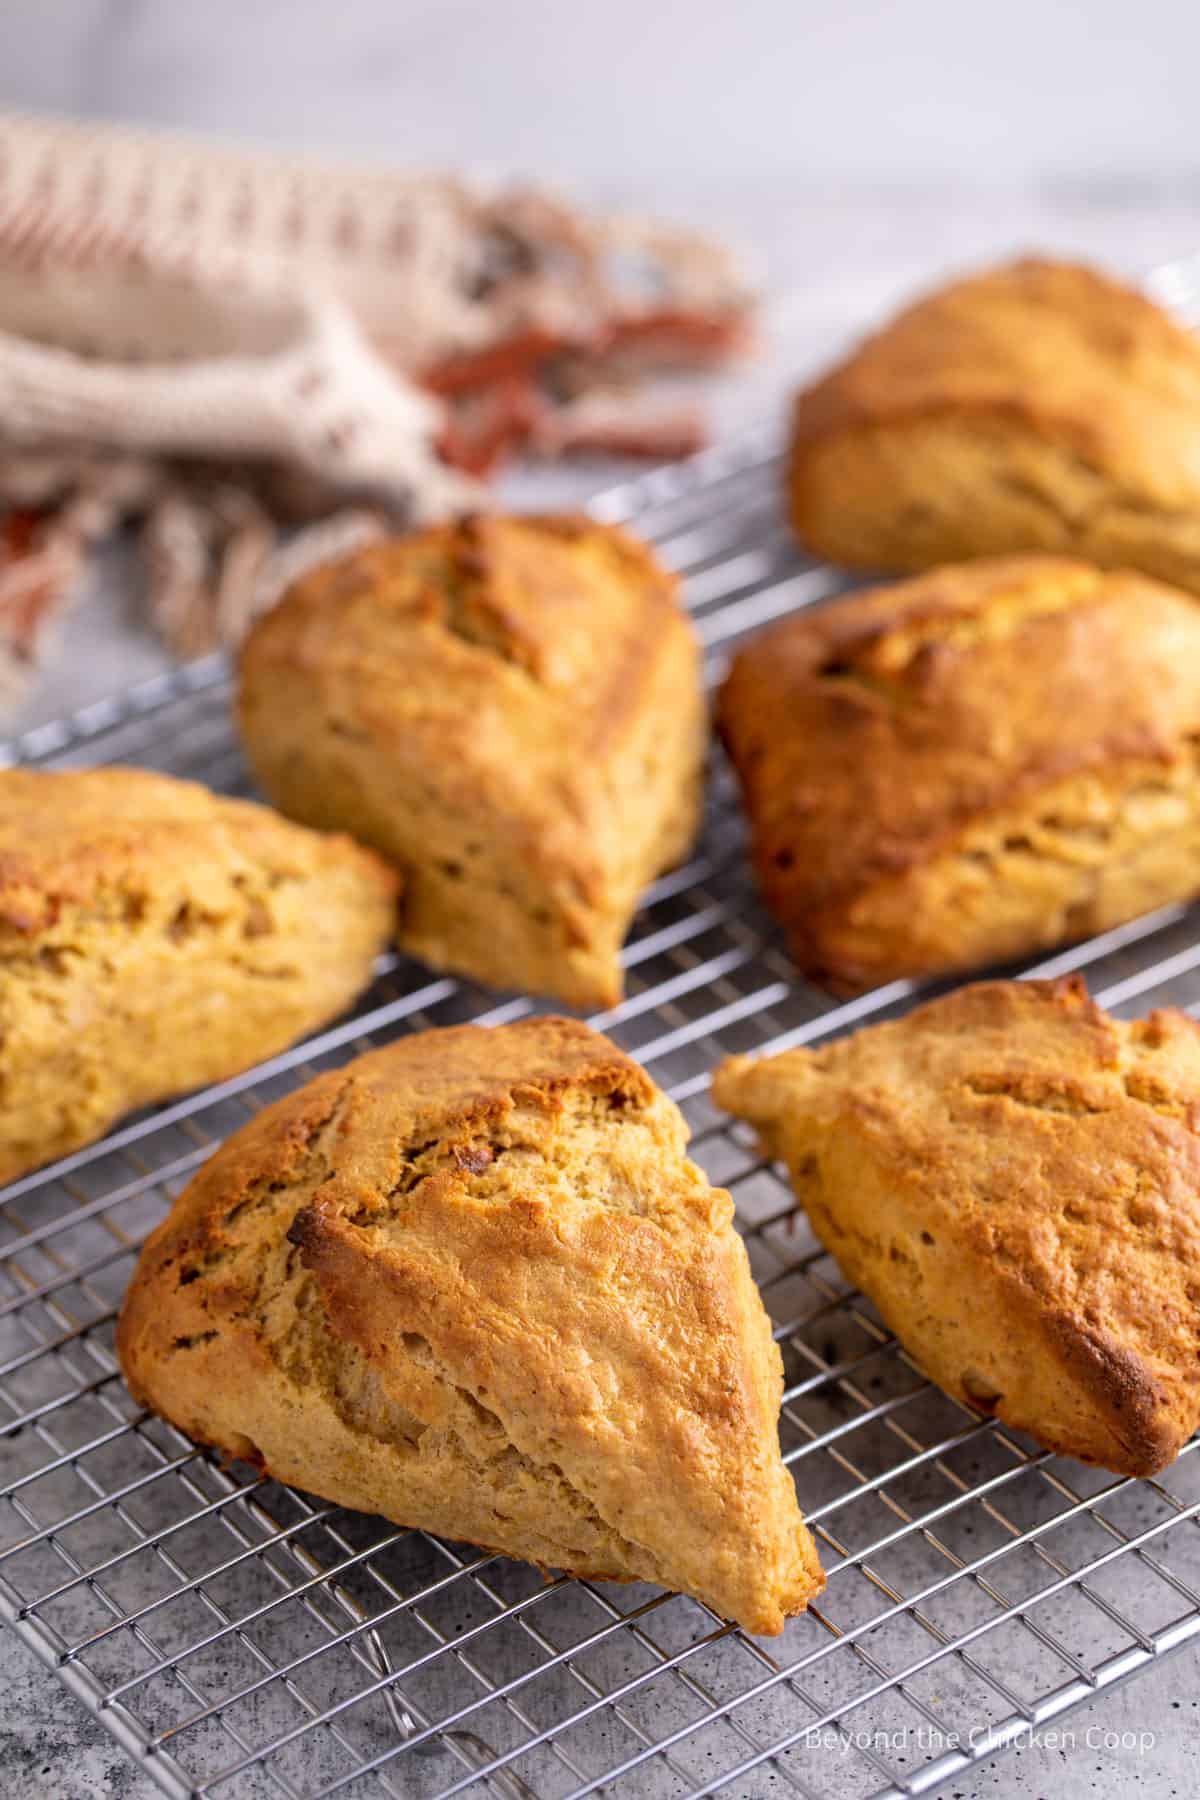 Baked scones on a baking rack.